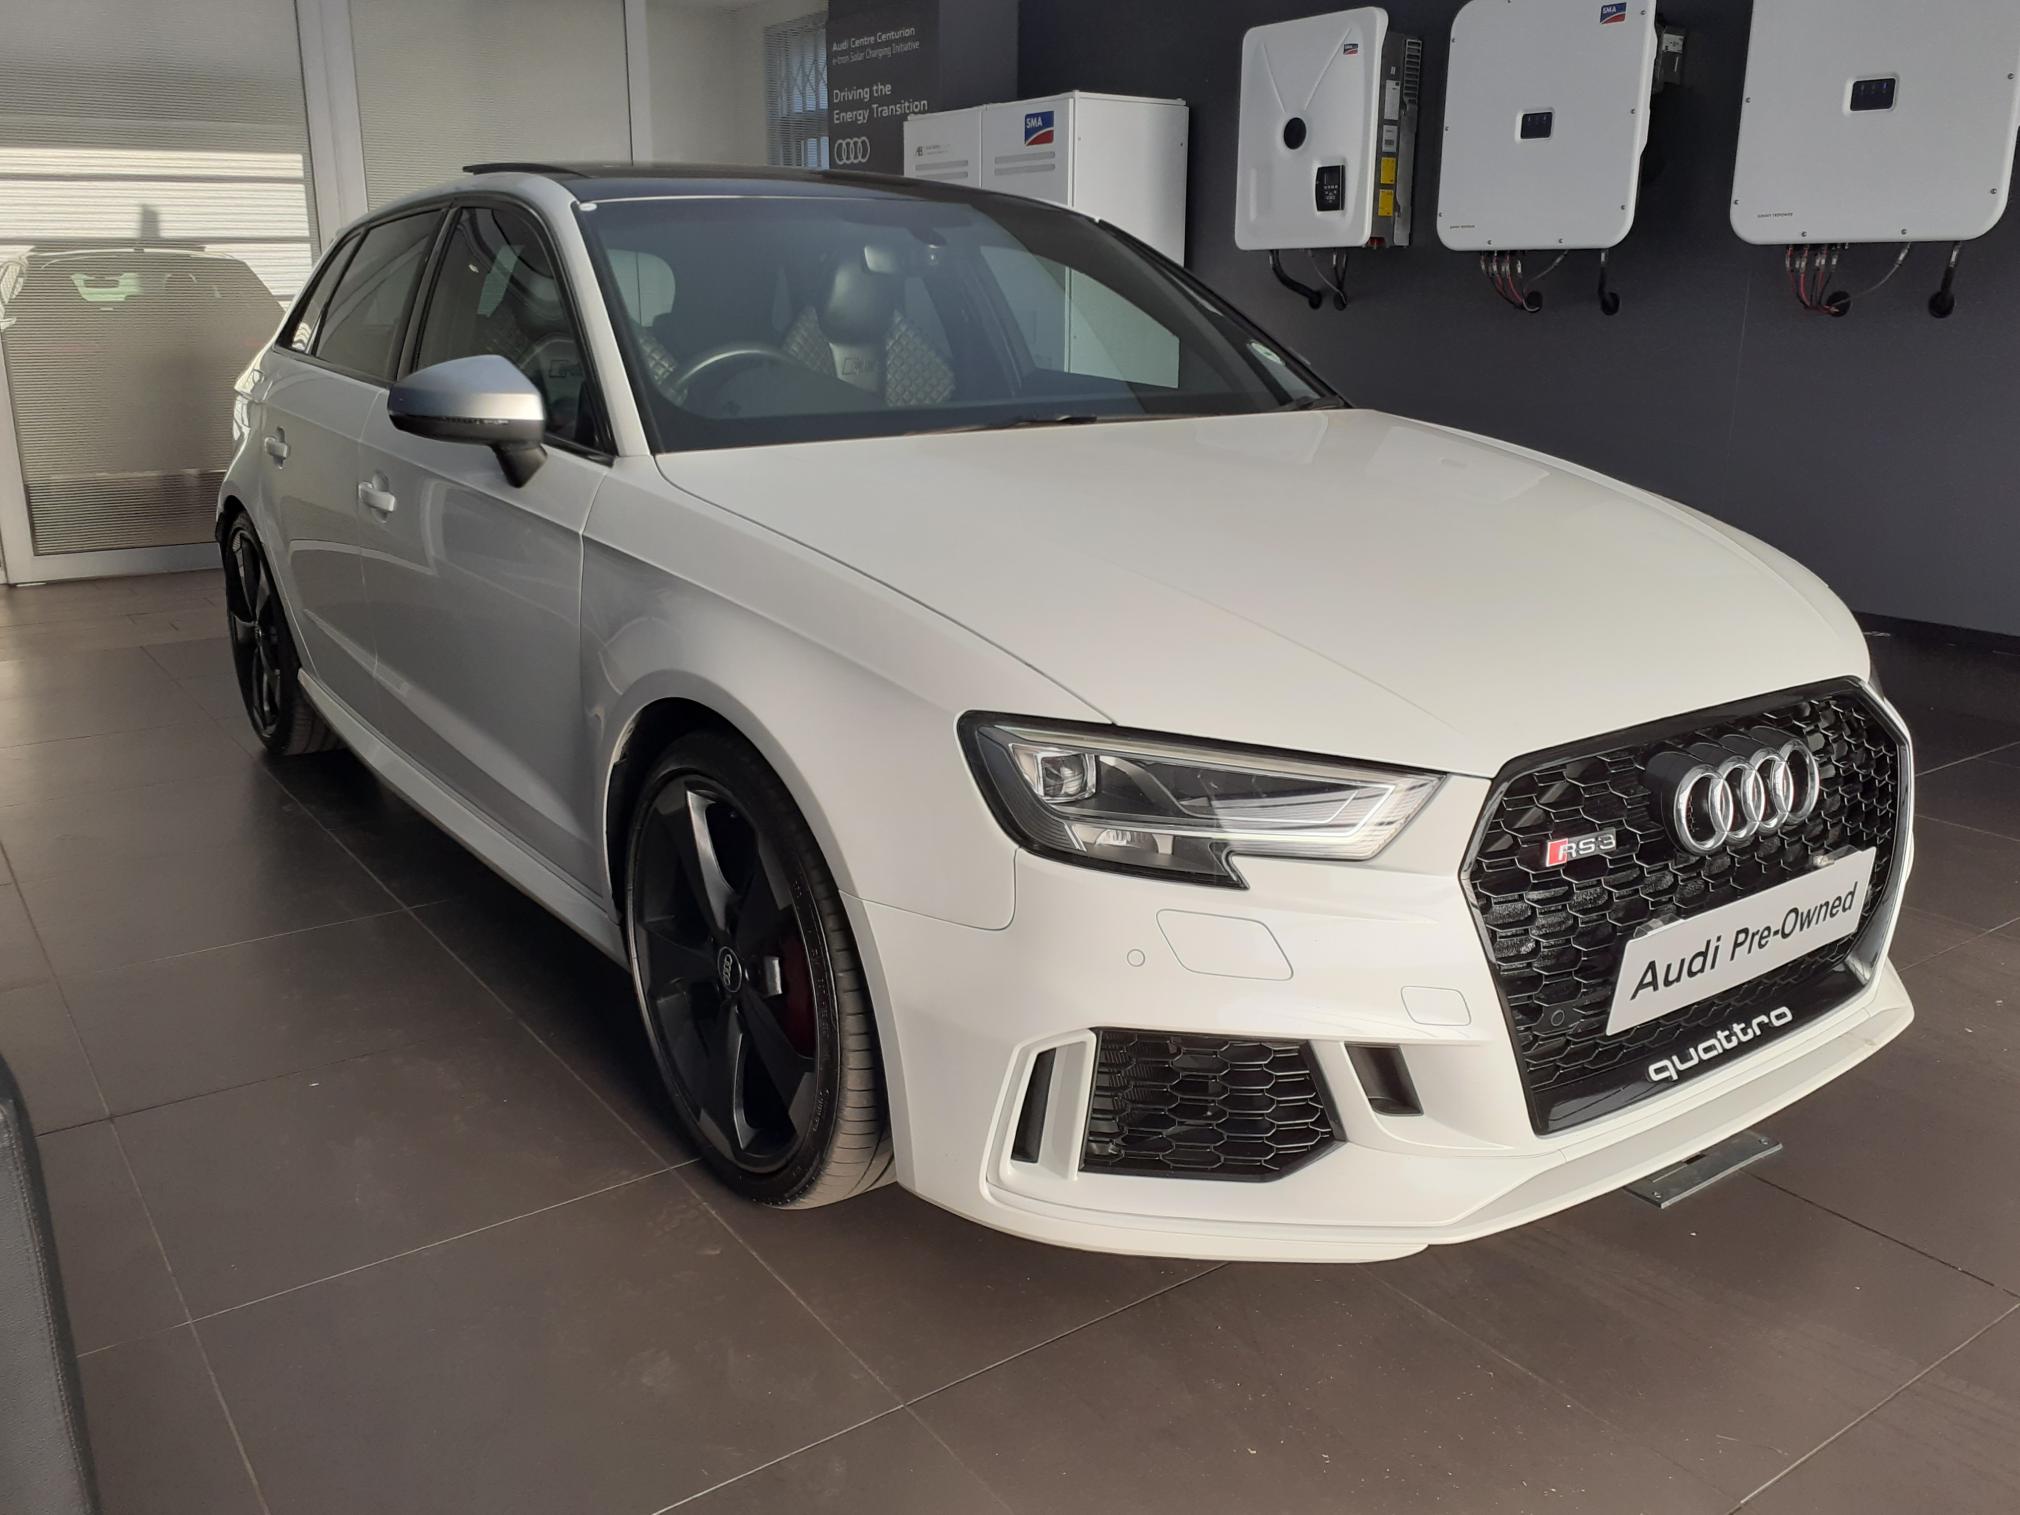 2017 Audi RS3  for sale - 0489POA902680